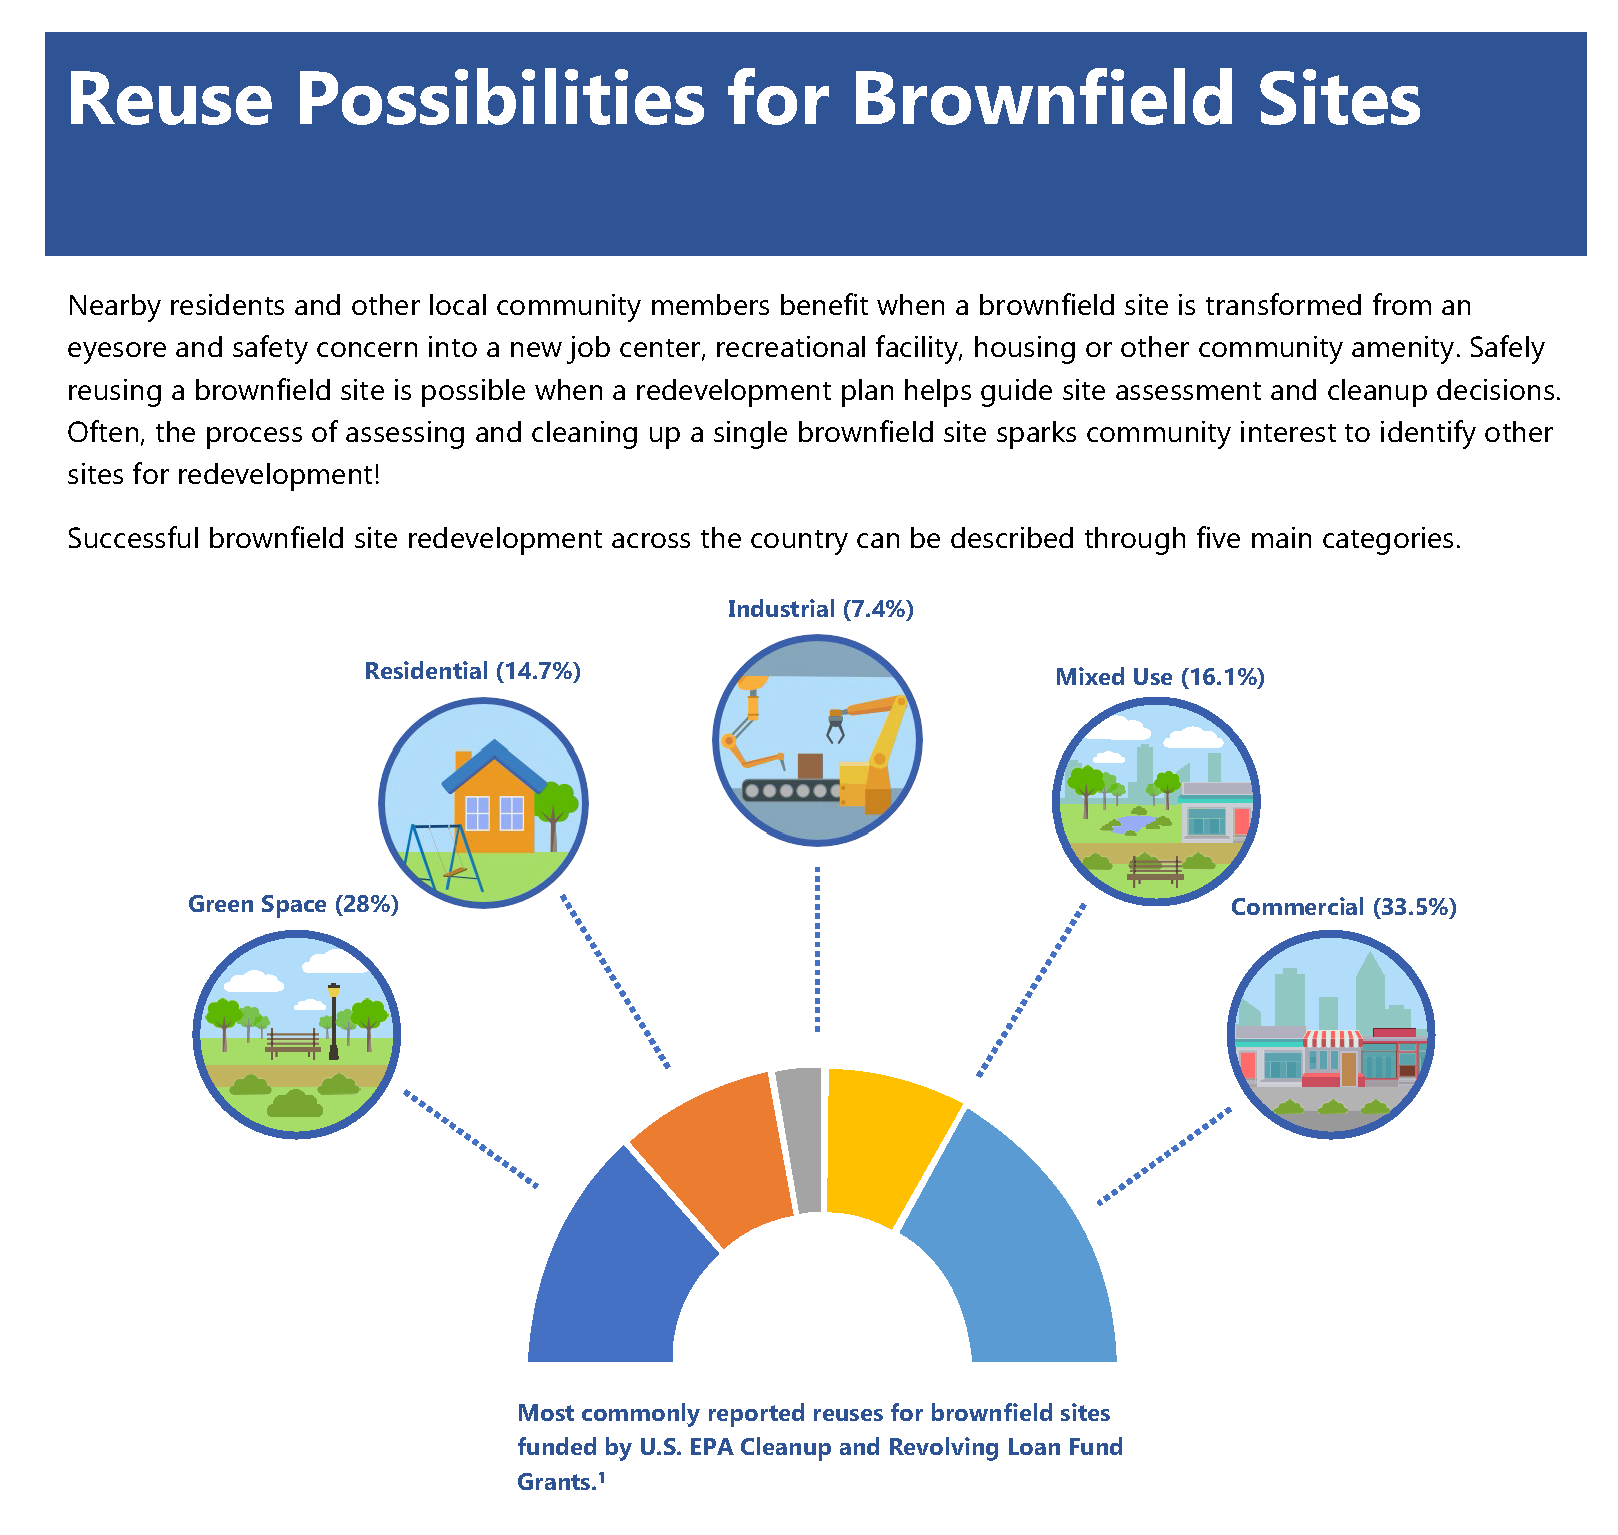 EPA Brownfields Fact Sheets provide Simple, Visual Introduction to Brownfields